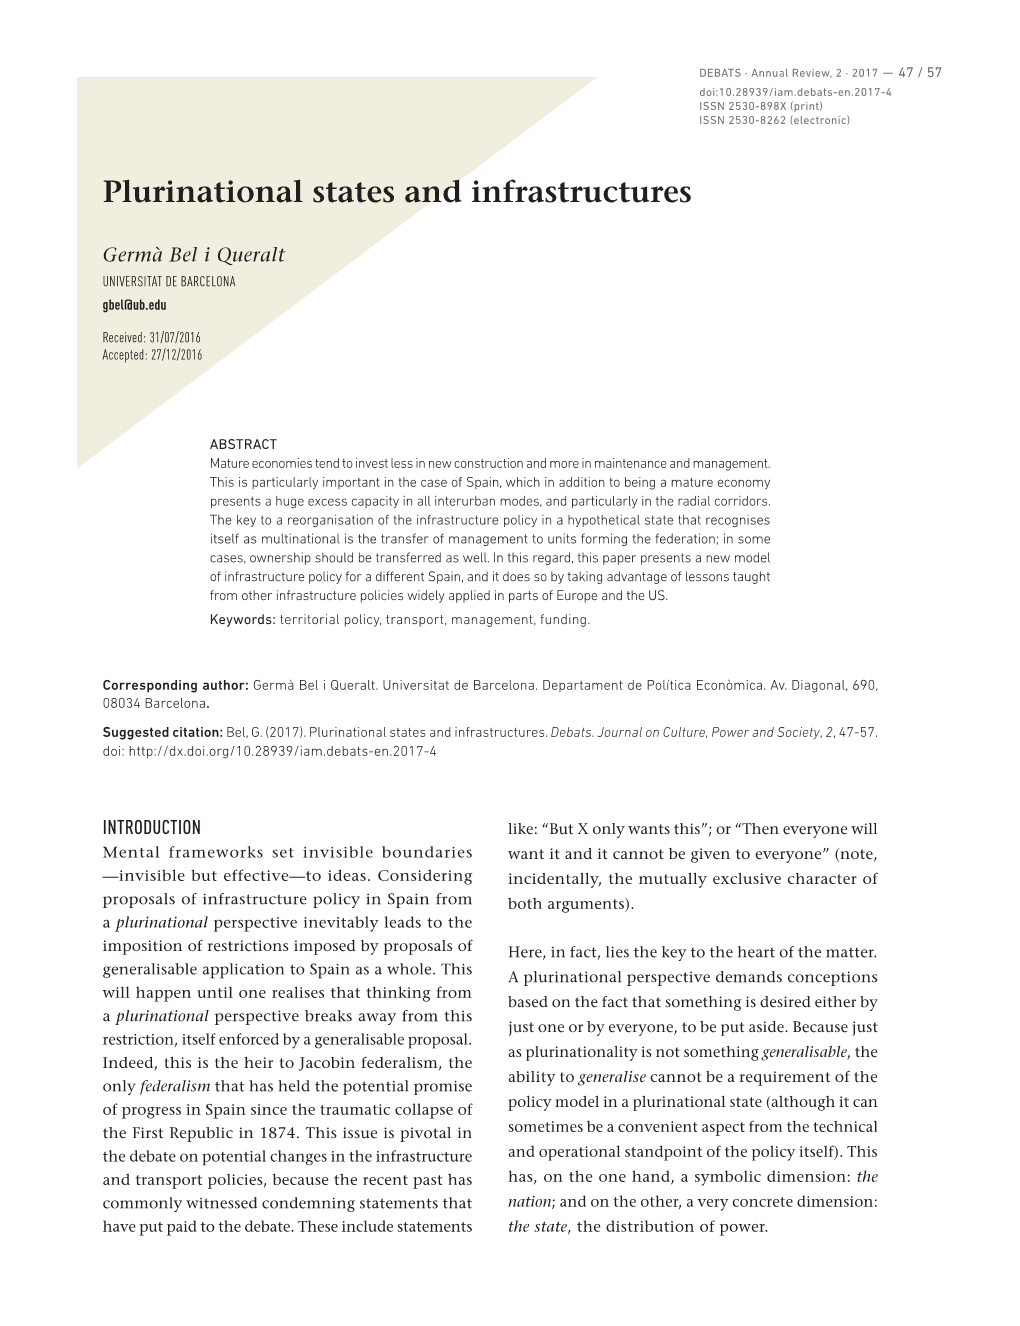 Plurinational States and Infrastructures